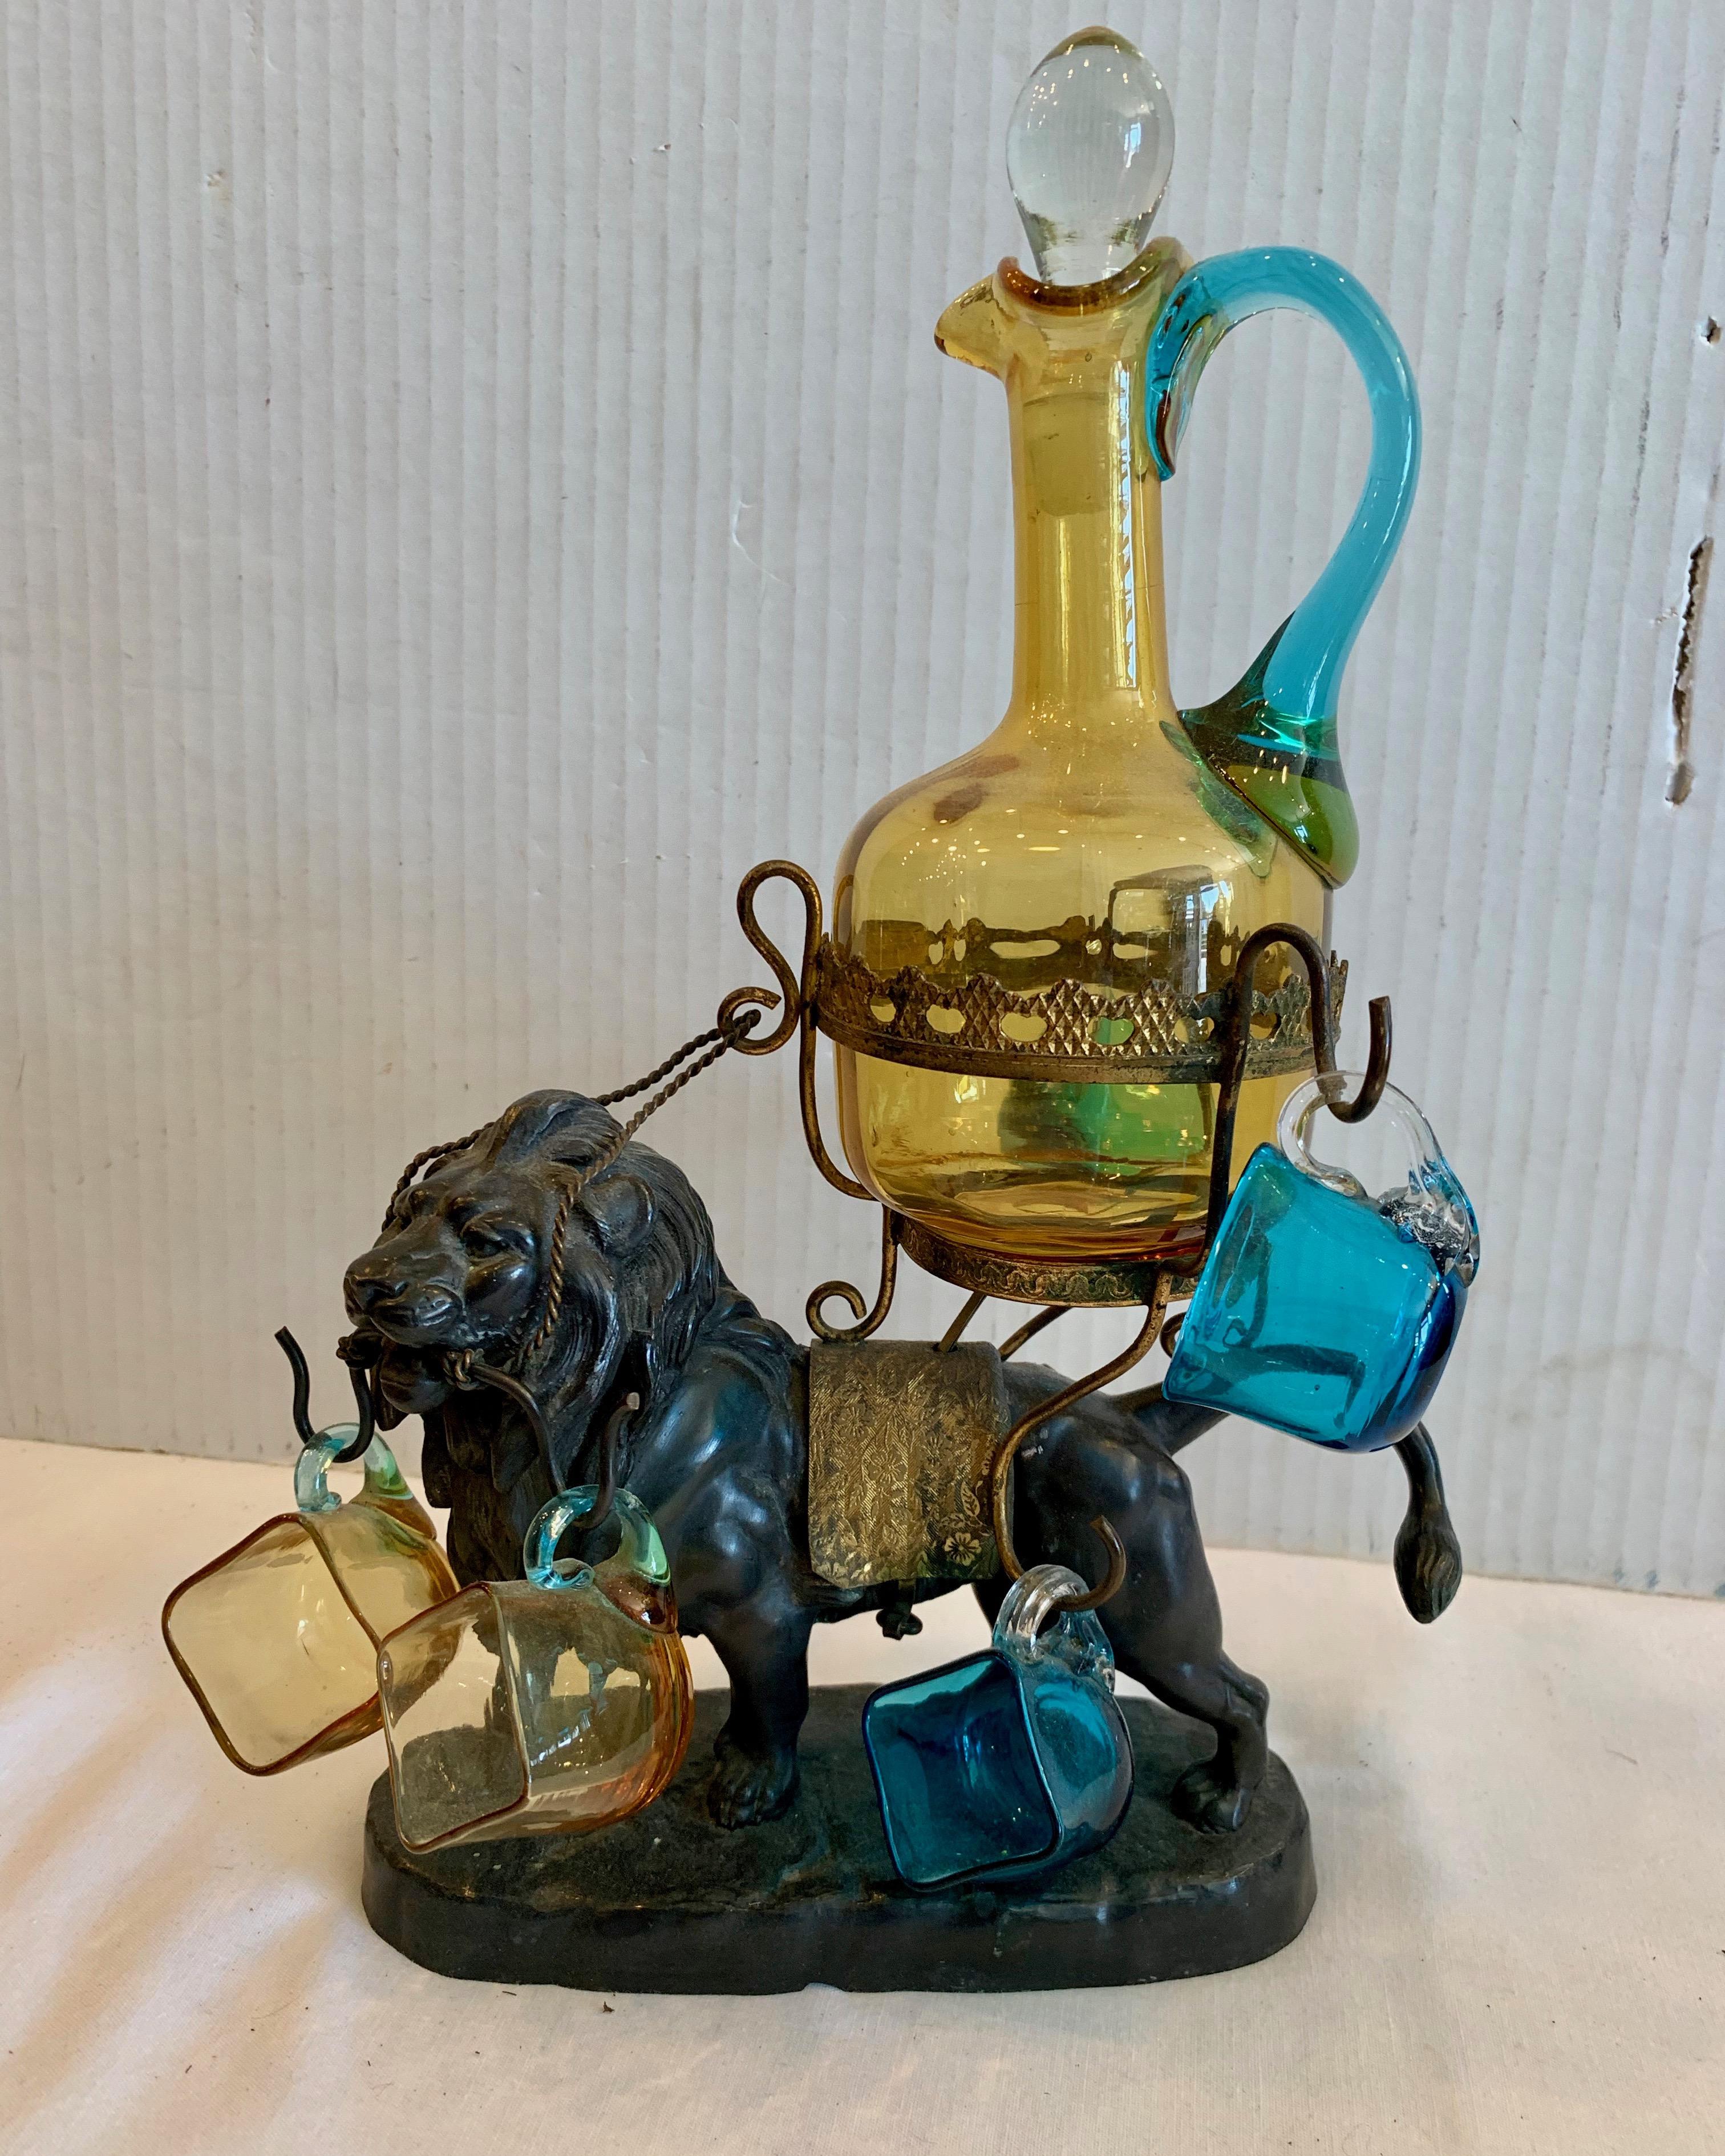 A finely cast bronze figure of a lion holding the original decanter and 6 glasses for sipping. An unusual antique barware accessory